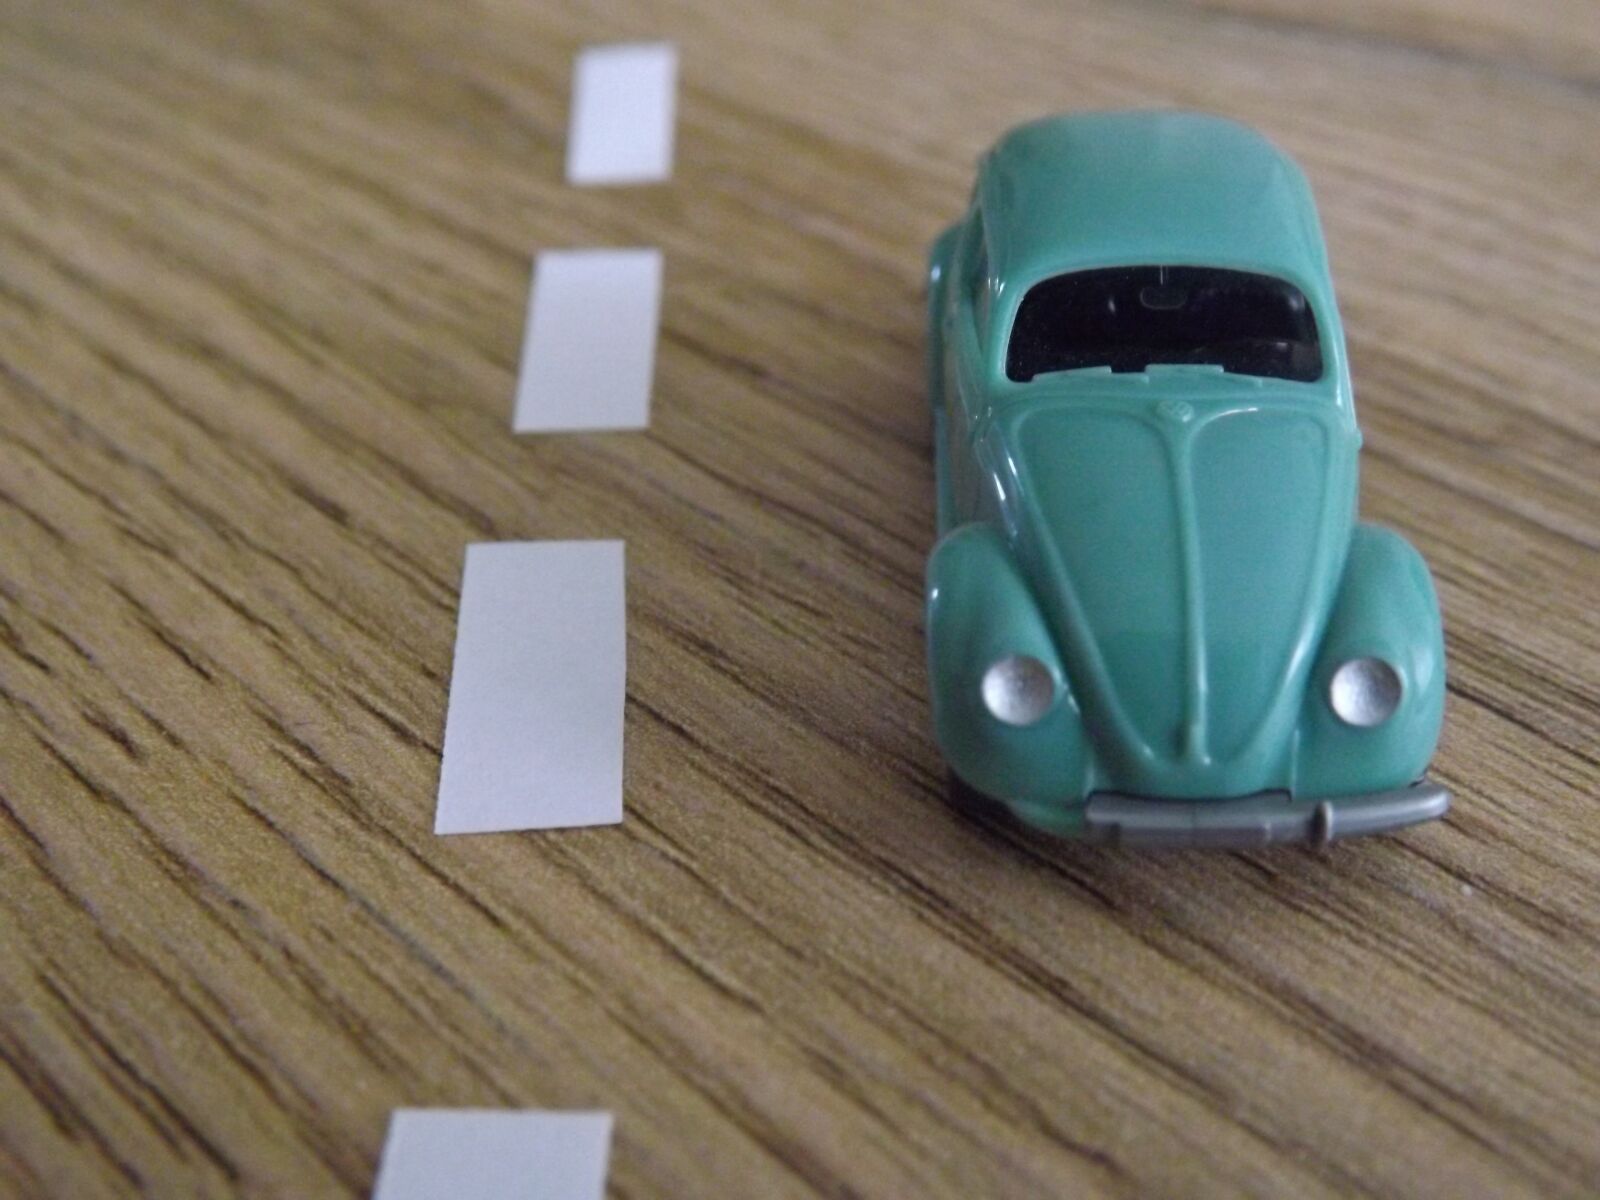 Fujifilm FinePix S4500 sample photo. Beetle, toy car, road photography